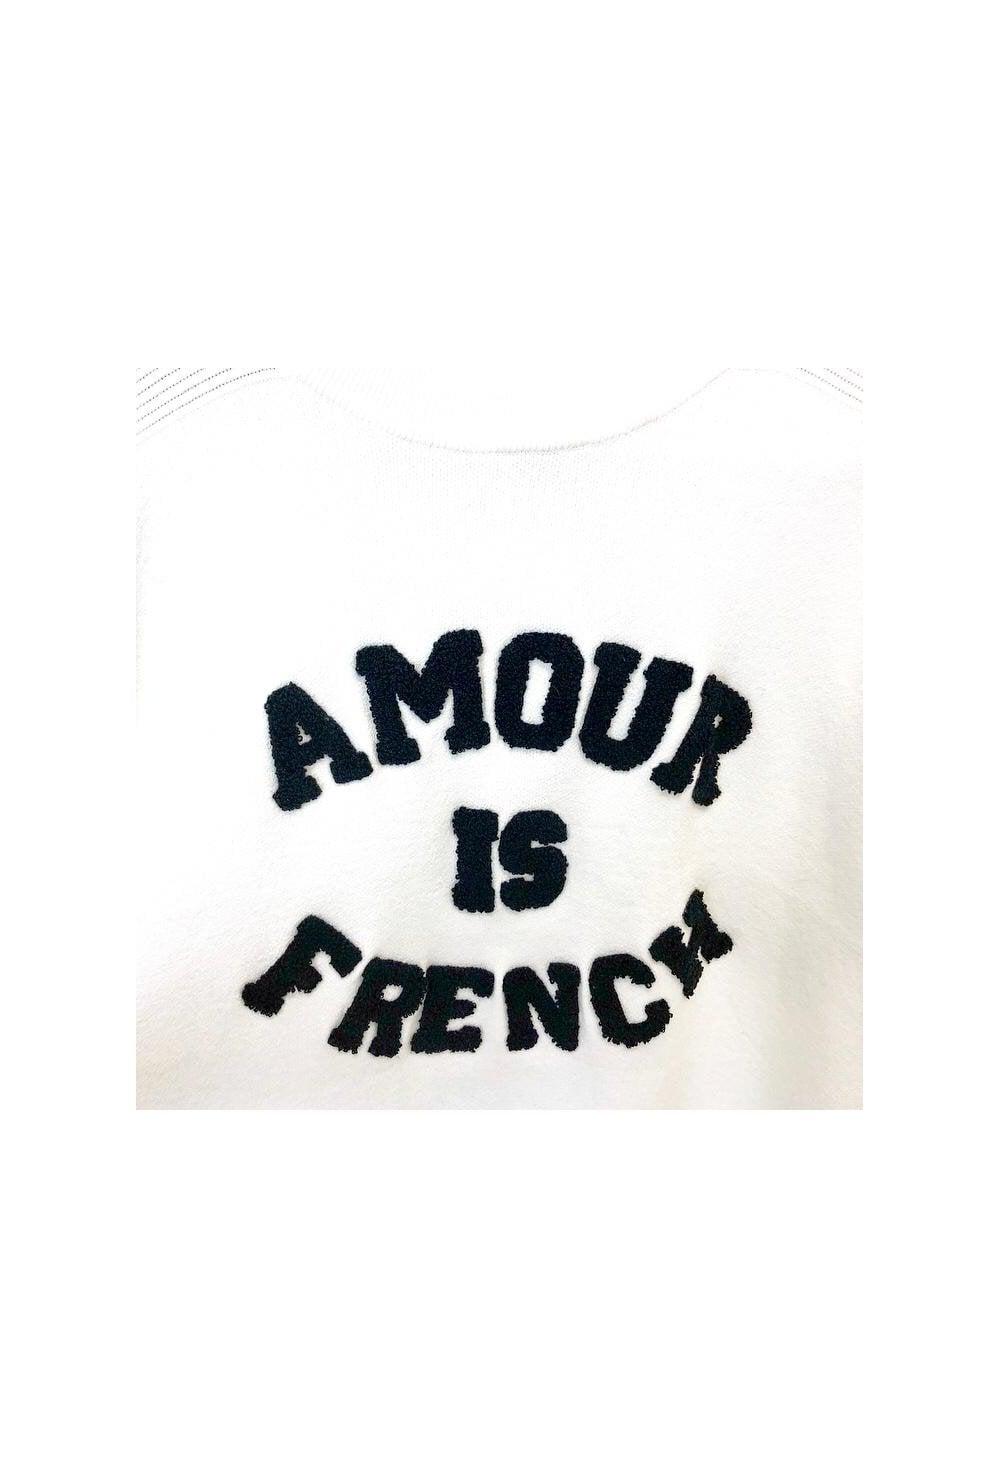 French Logo - Amour is French Logo Jumper - from Ruby Room UK